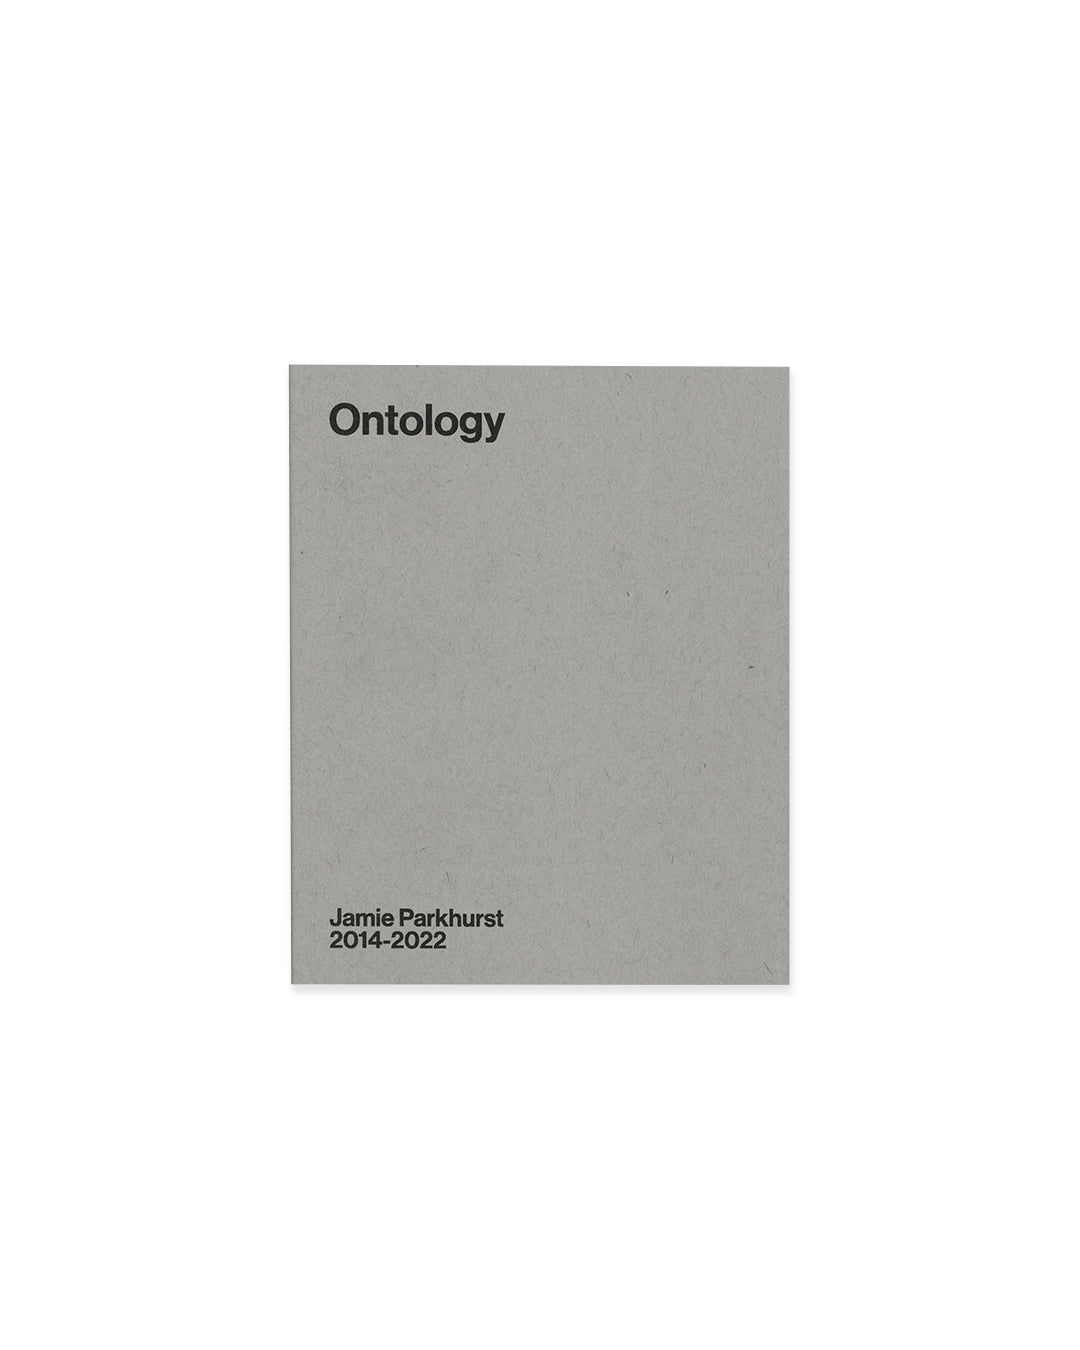 ONTOLOGY: A VISUAL DIALOGUE by Jamie Parkhurst